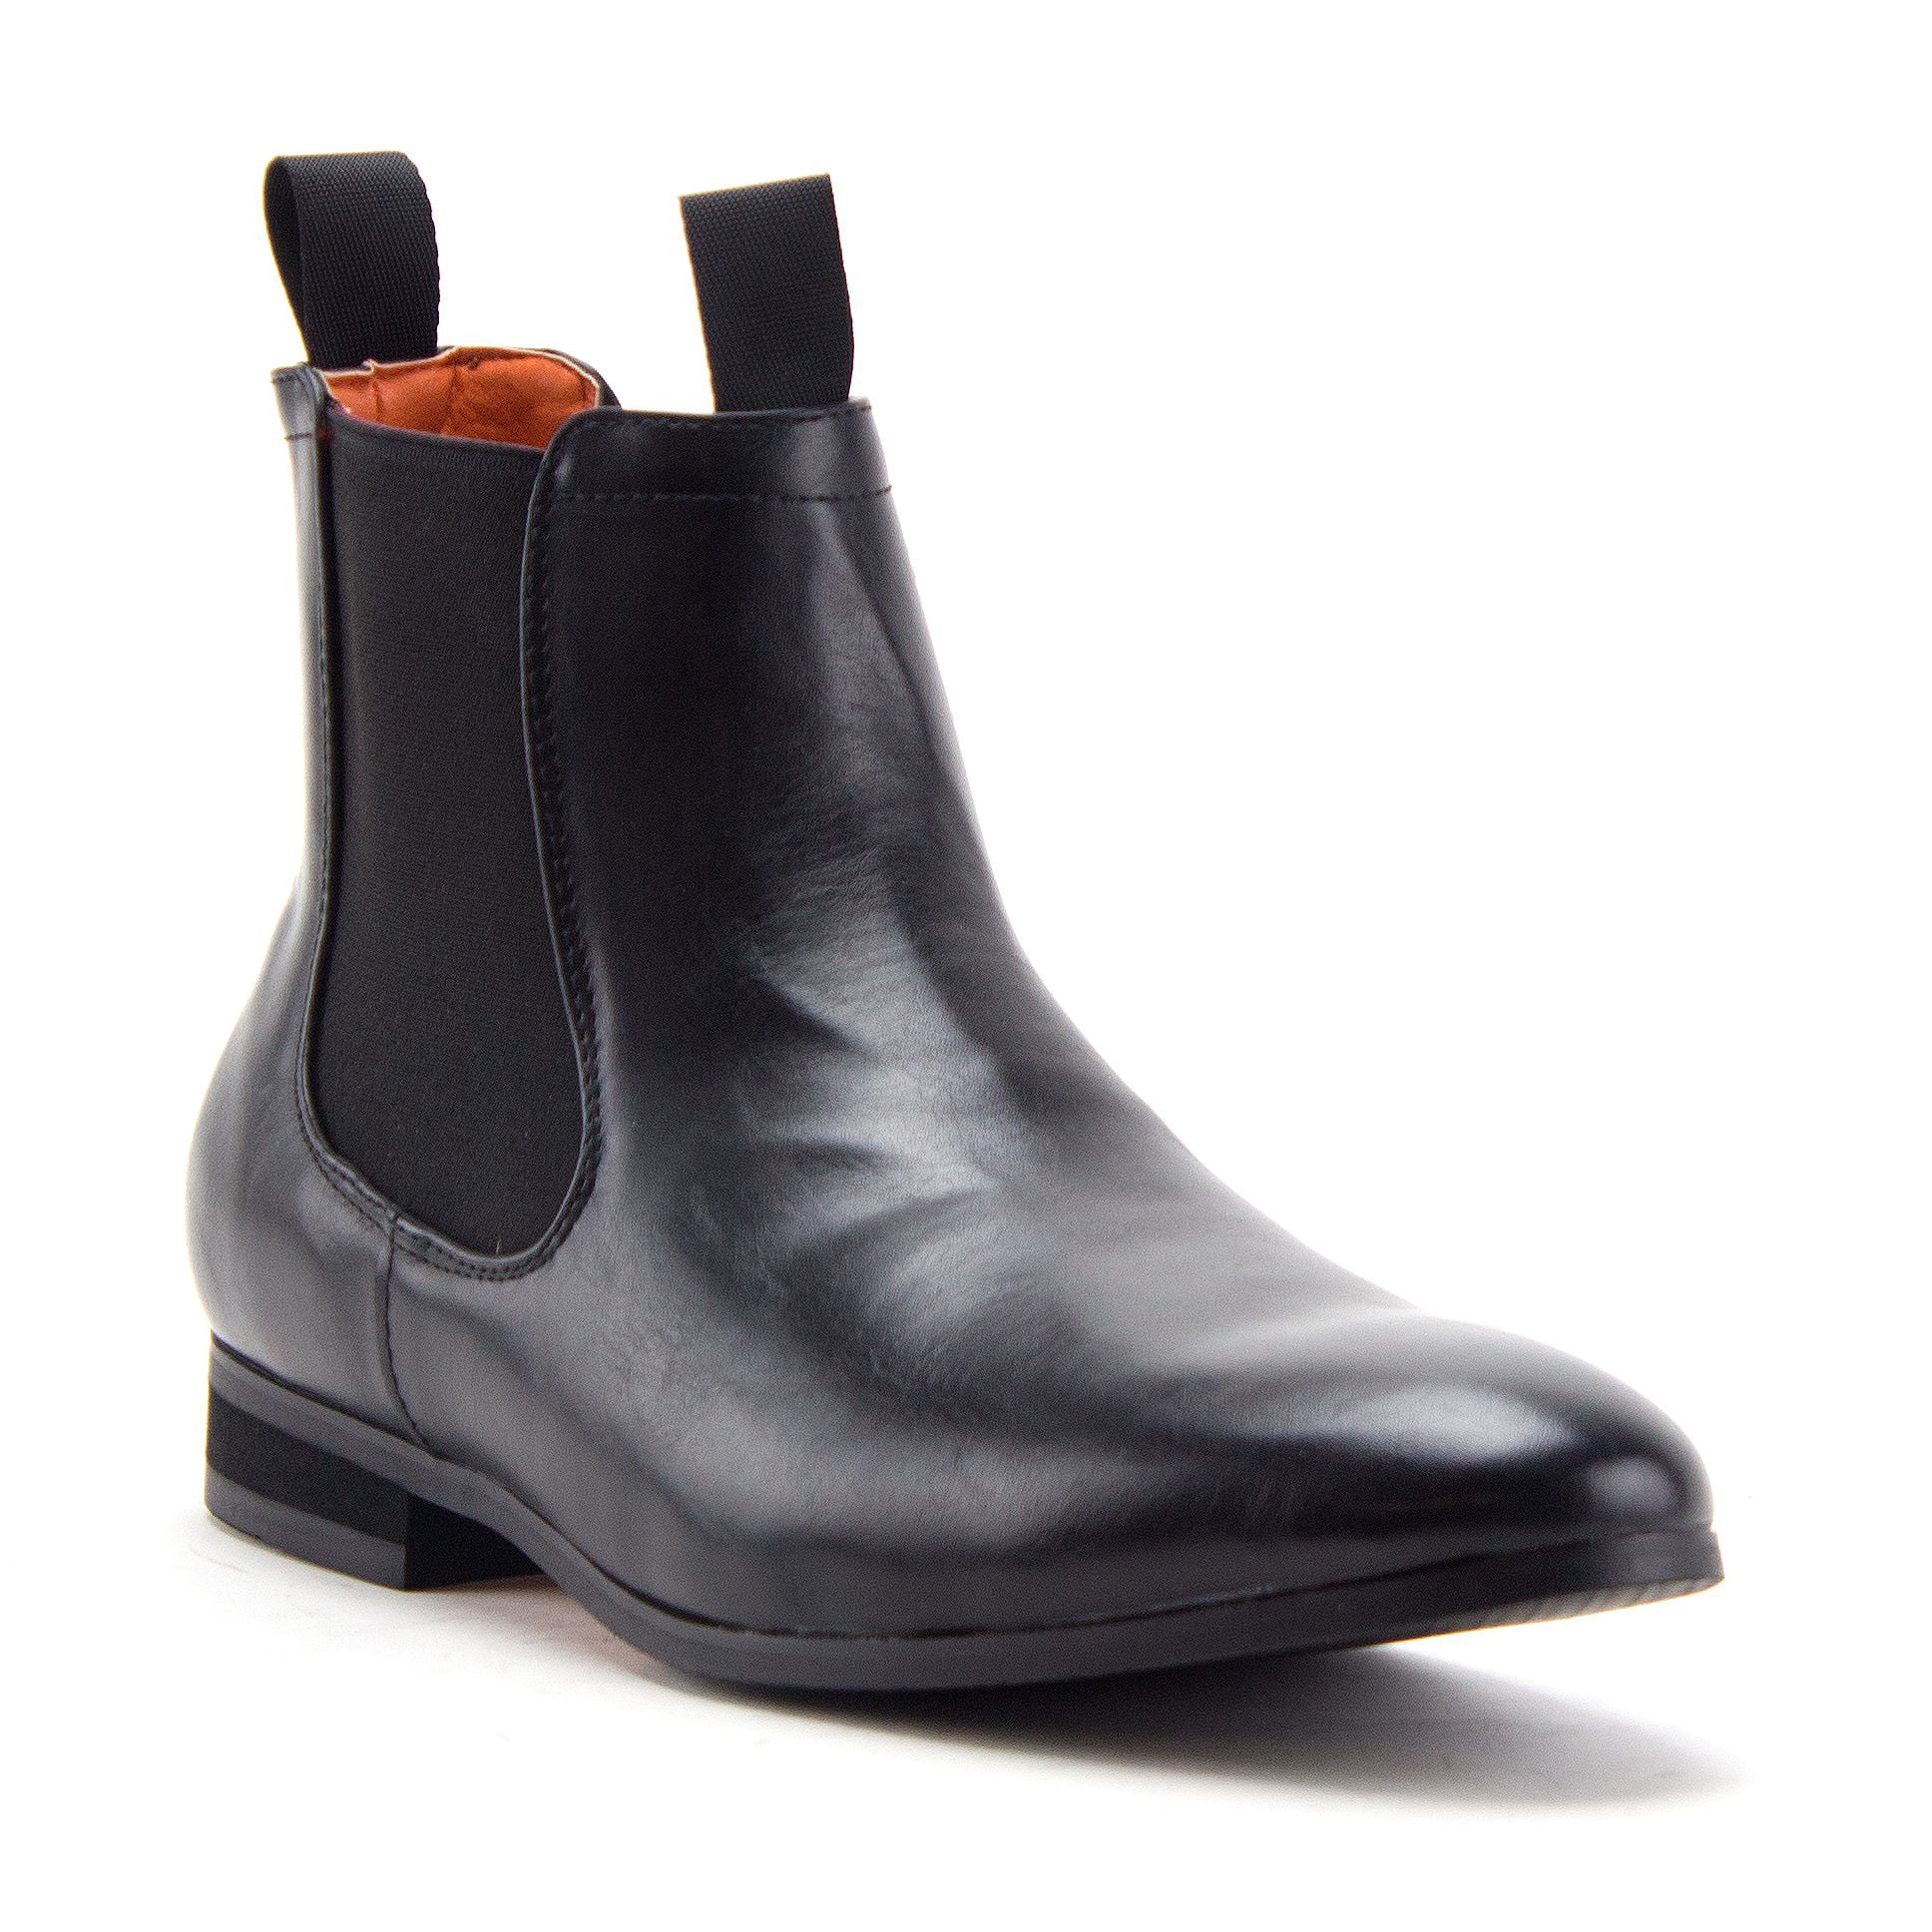 Jazame - Men's B-745 Pull-On Round Toe Ankle High Chelsea Dress Boots